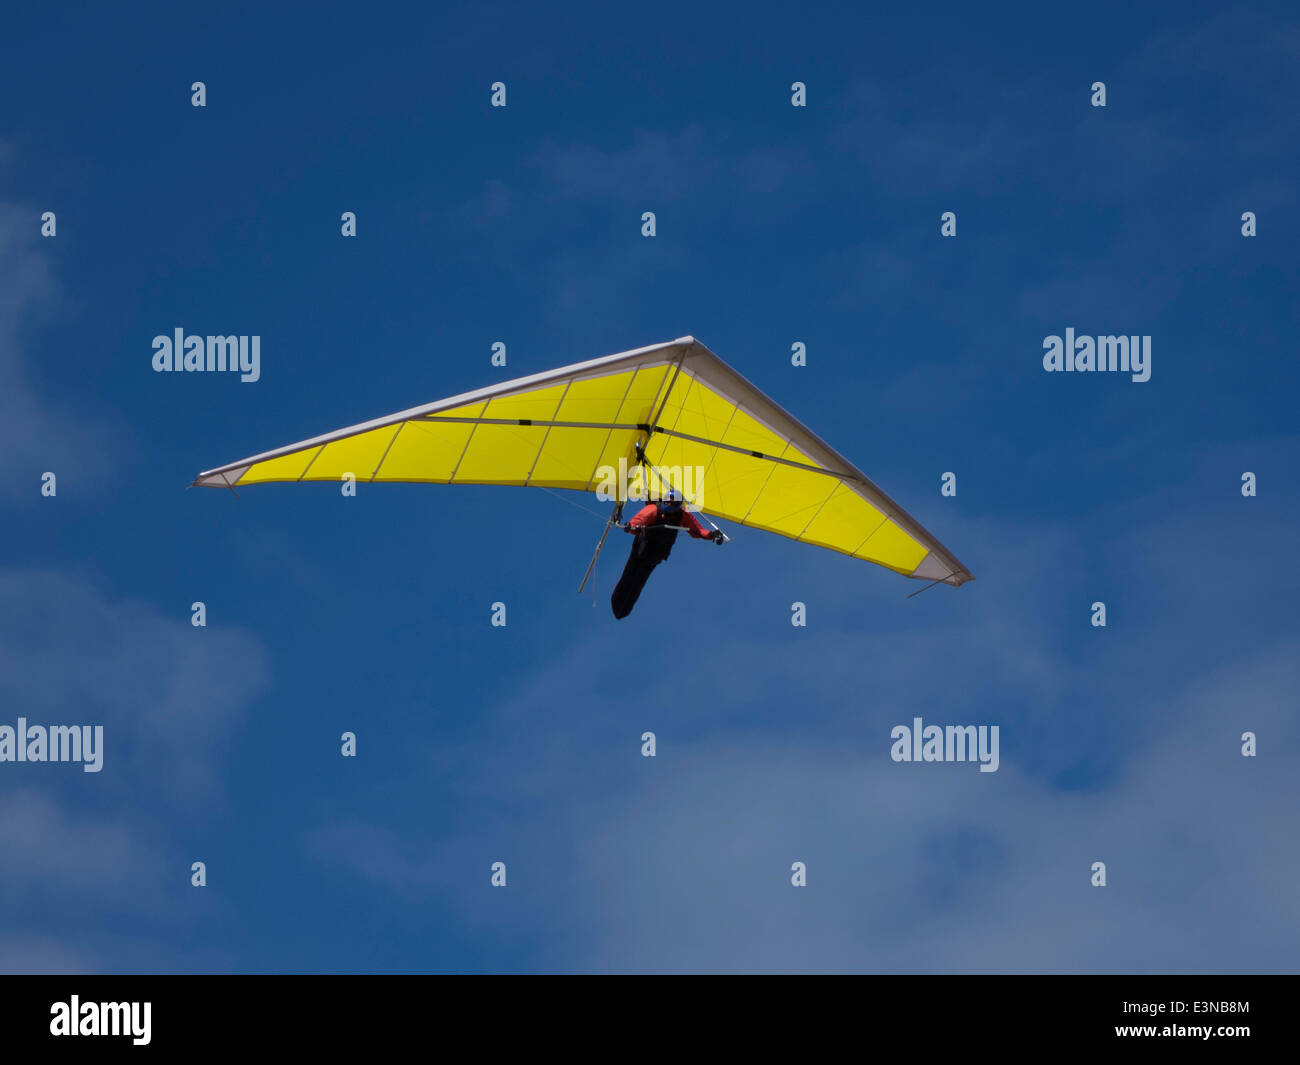 Low angle view of person hang-gliding against blue sky Stock Photo